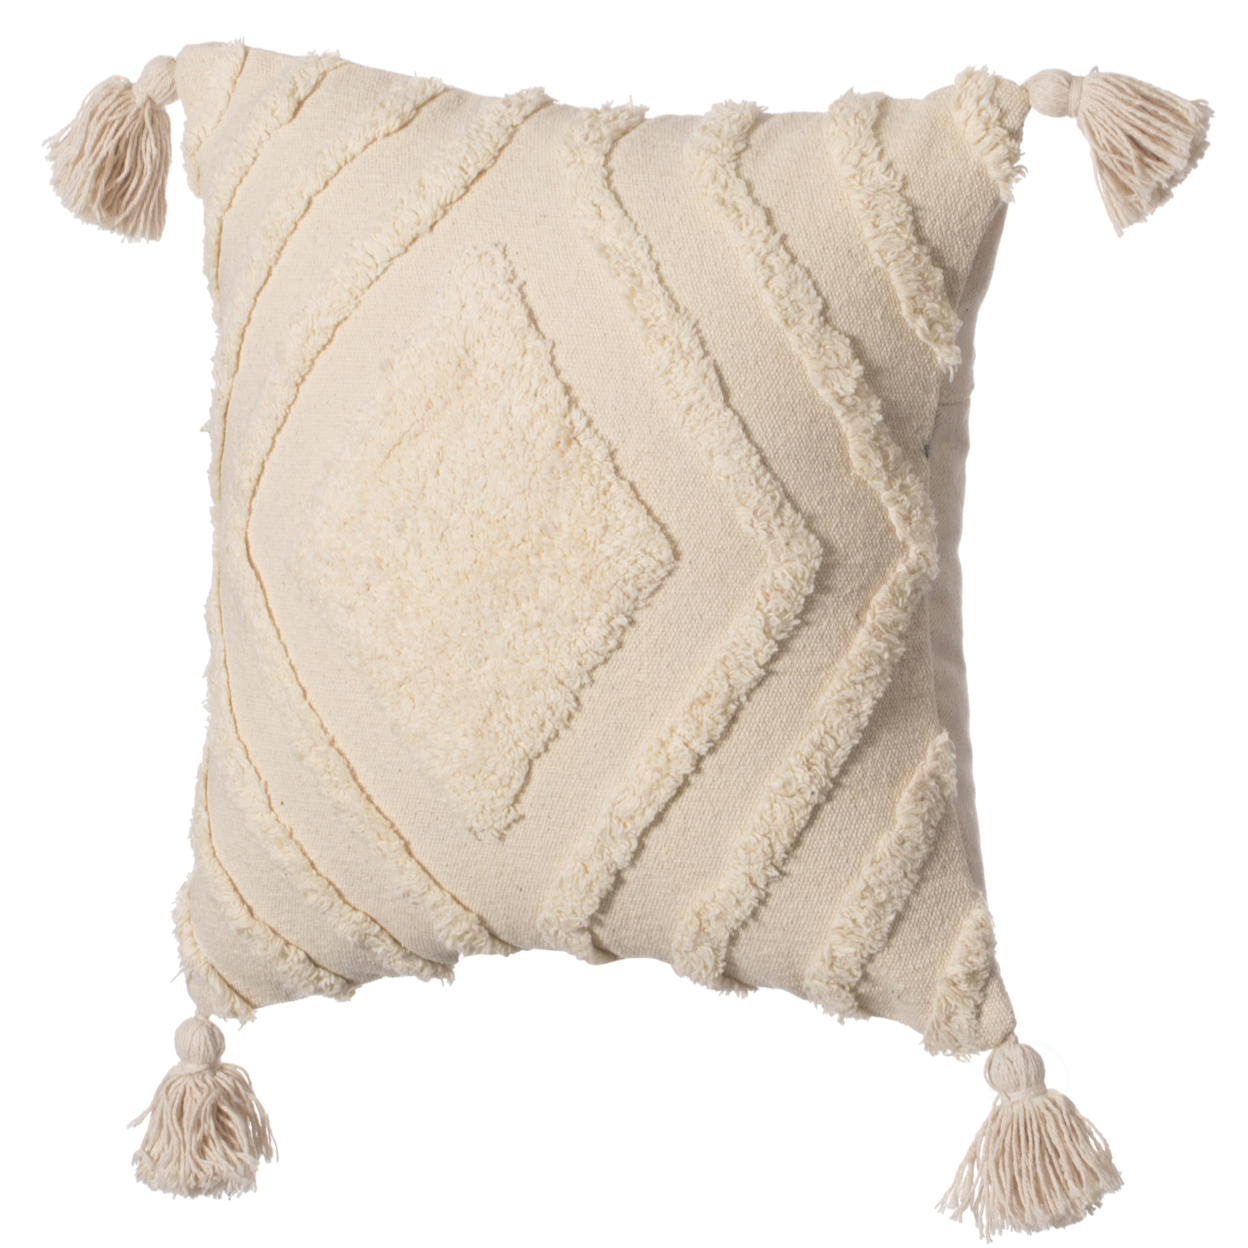 16 Handwoven Cotton Throw Pillow Cover With White On White Tufted Design And Tassel Corners - Stem